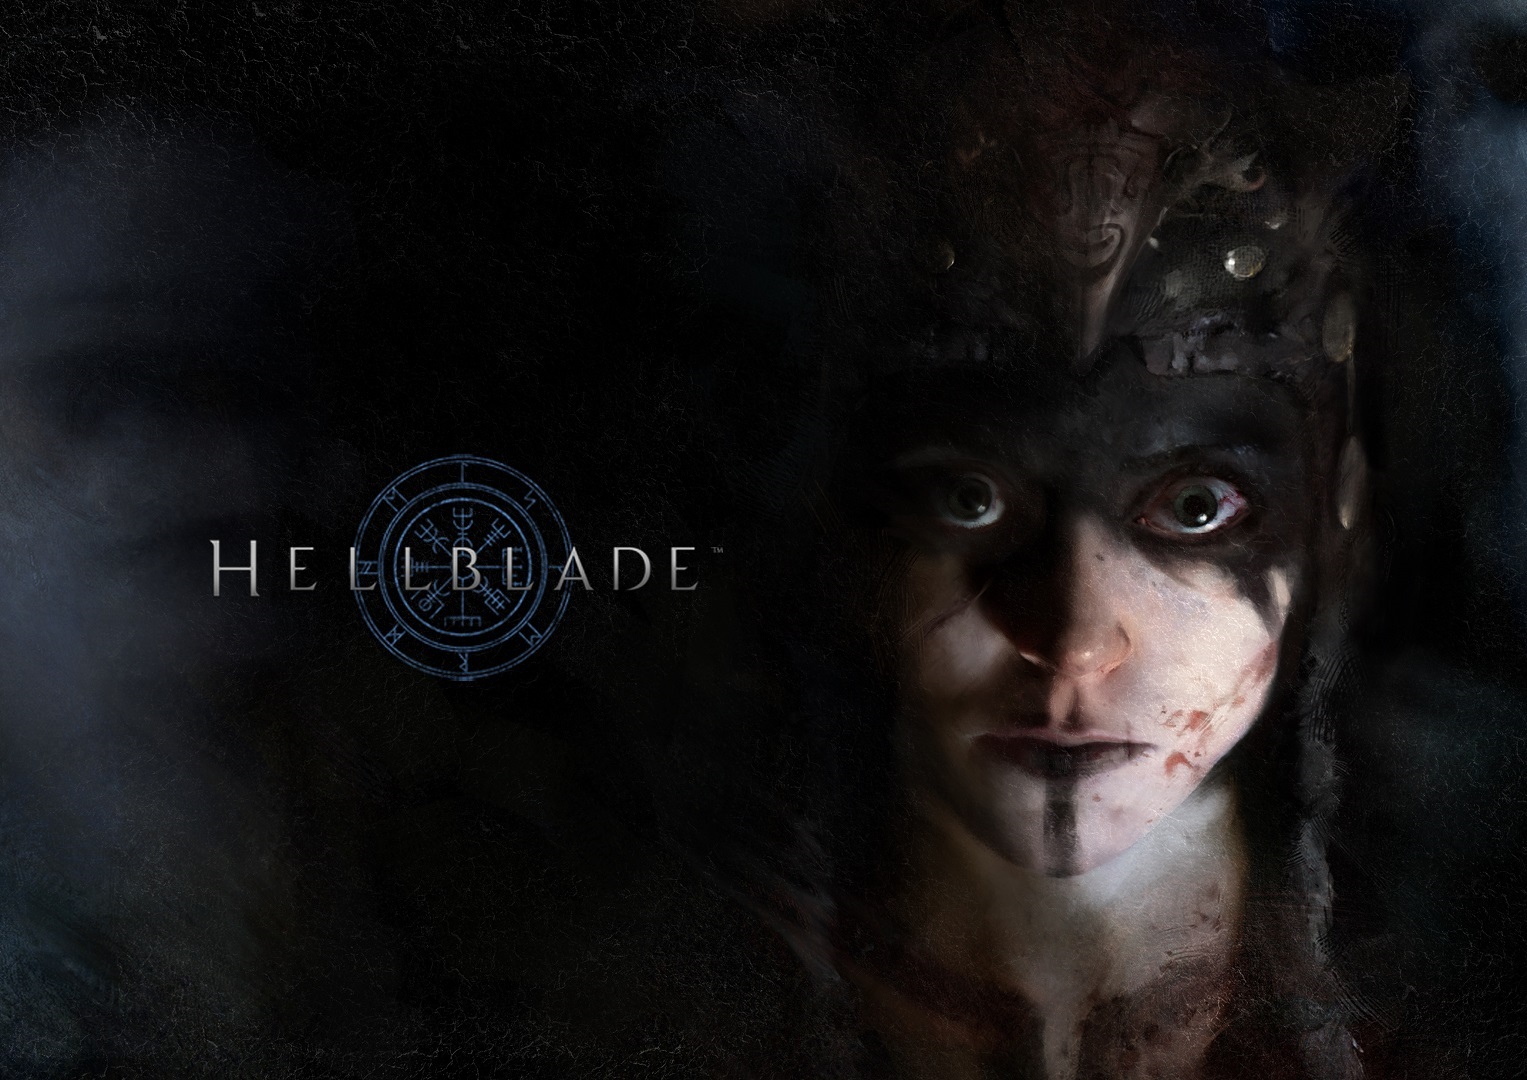 download senua hellblade for free